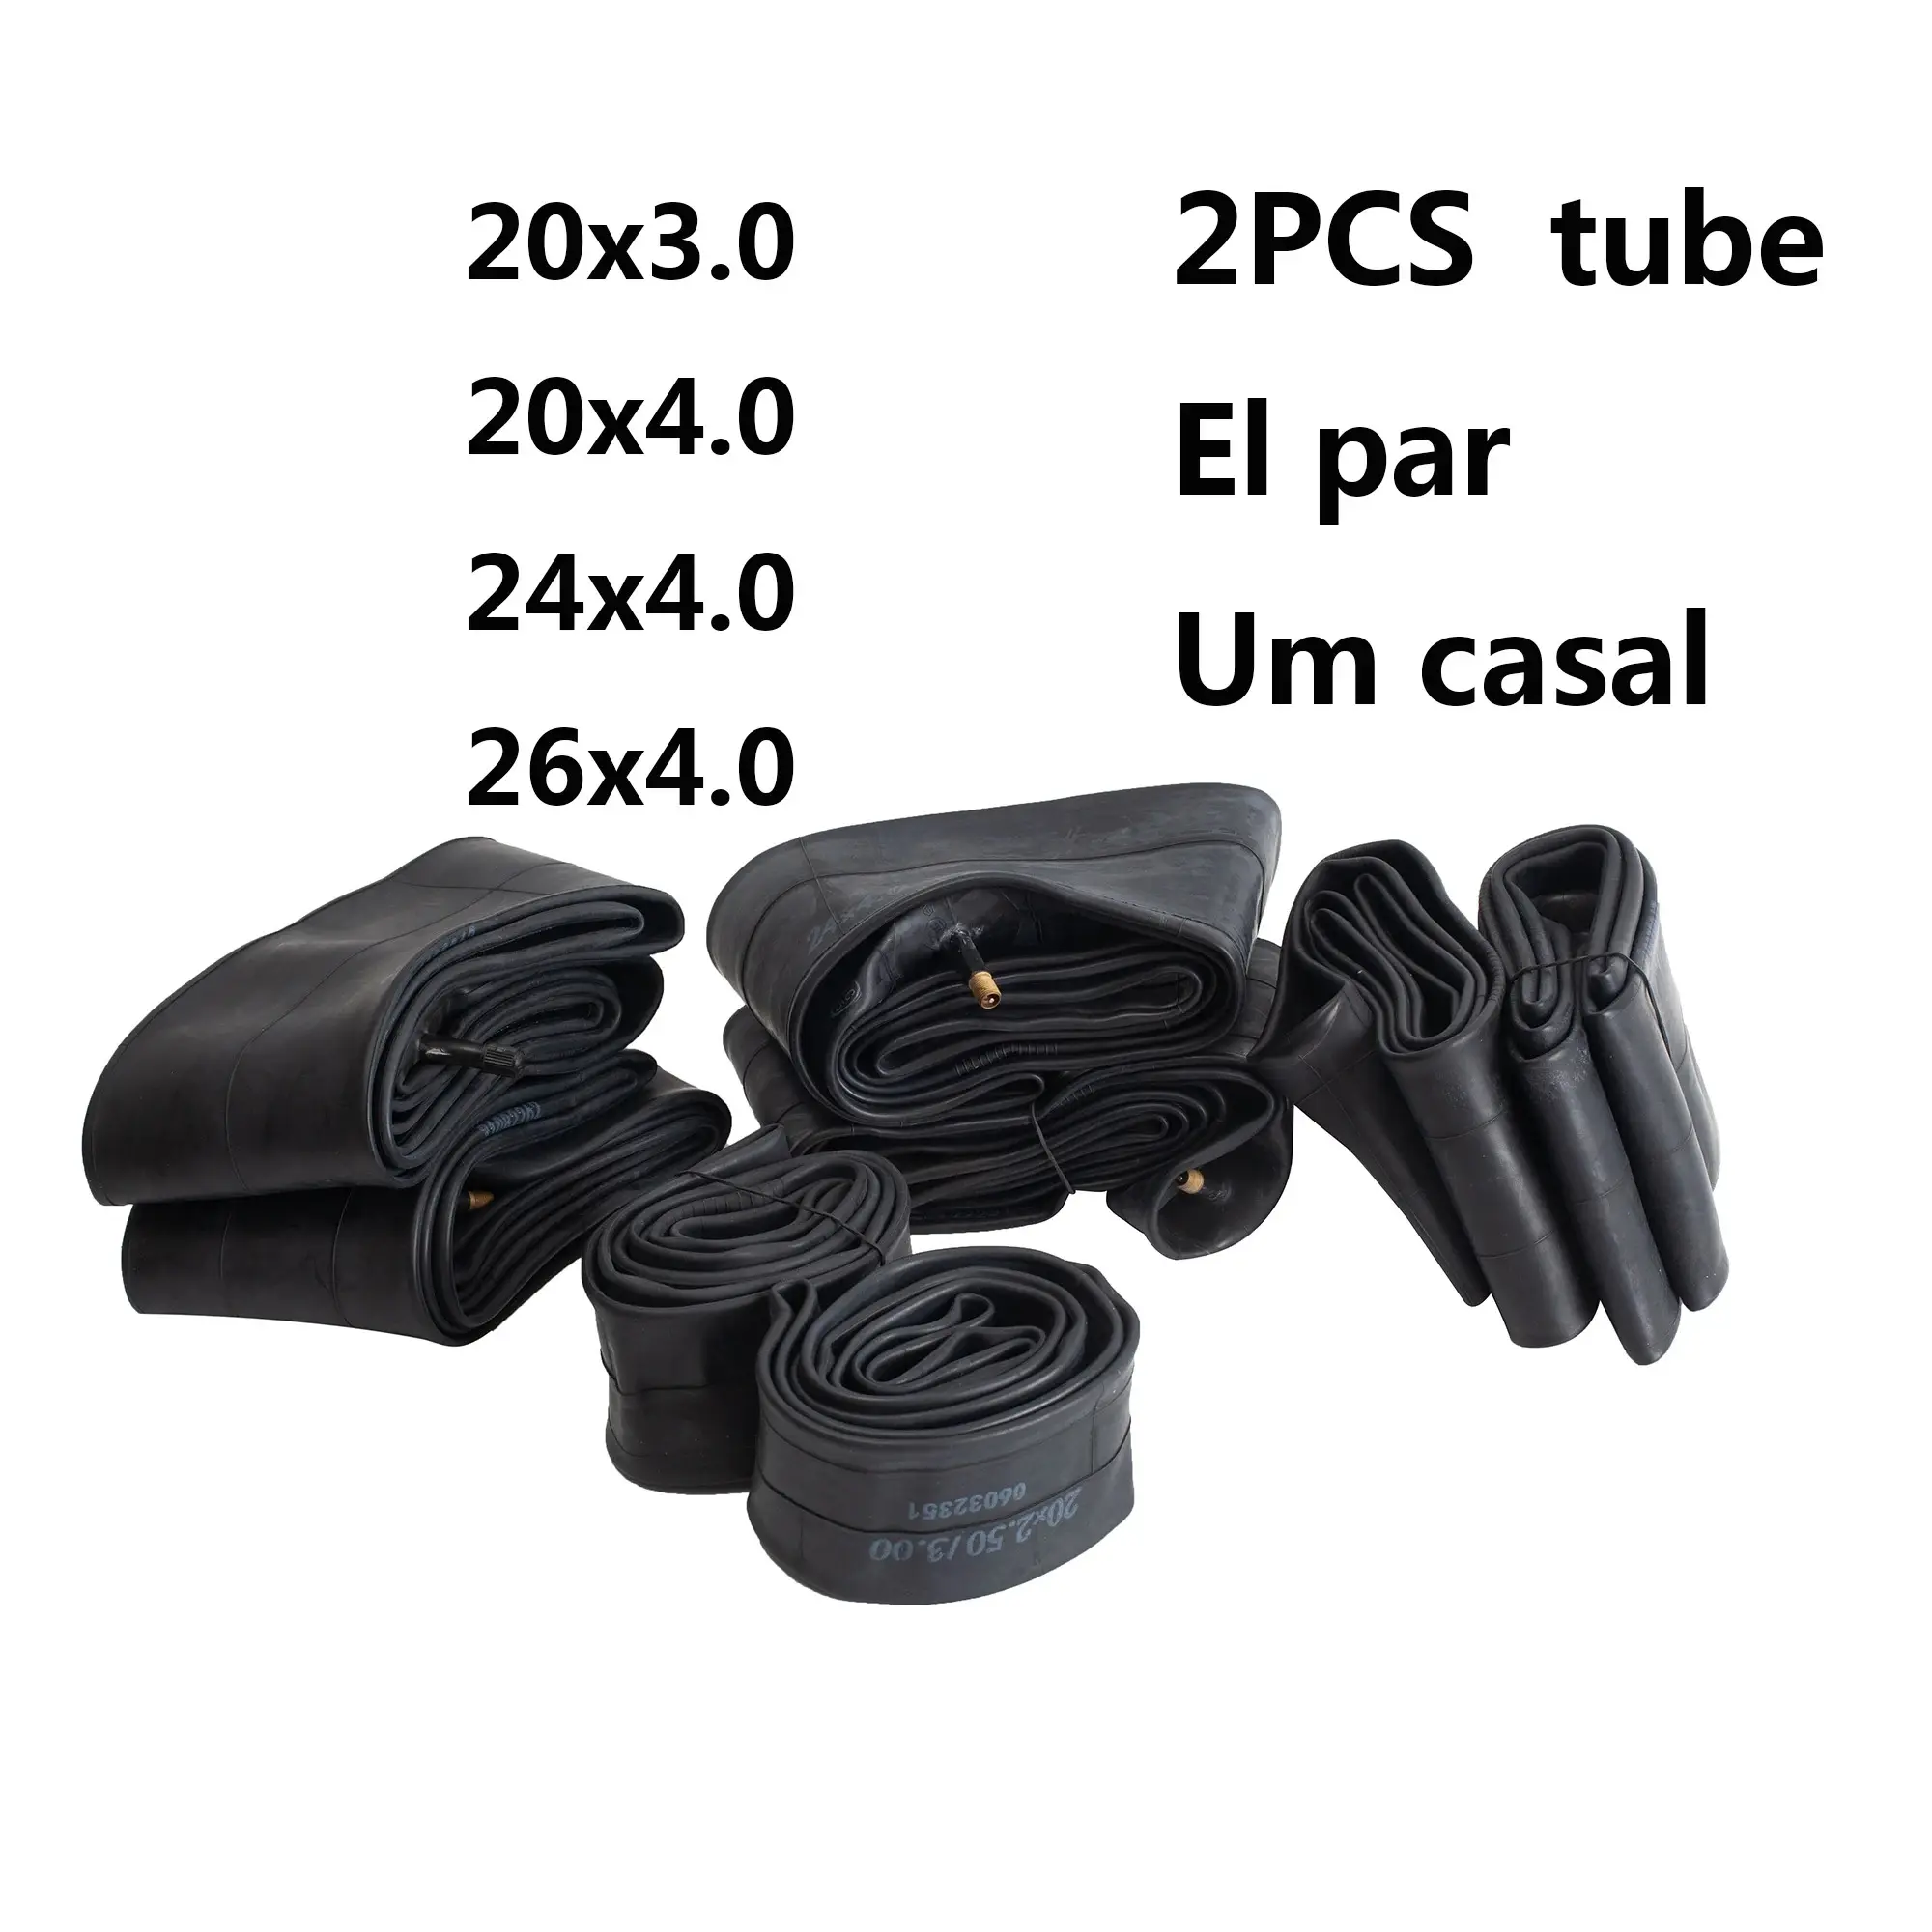 Fat Bicycle Tube 20 X 3.0 20x4.0 24x4.0 26x4.0 Bike Inner Tube For Snowmobiles Bicycles ATVs Black Tyre